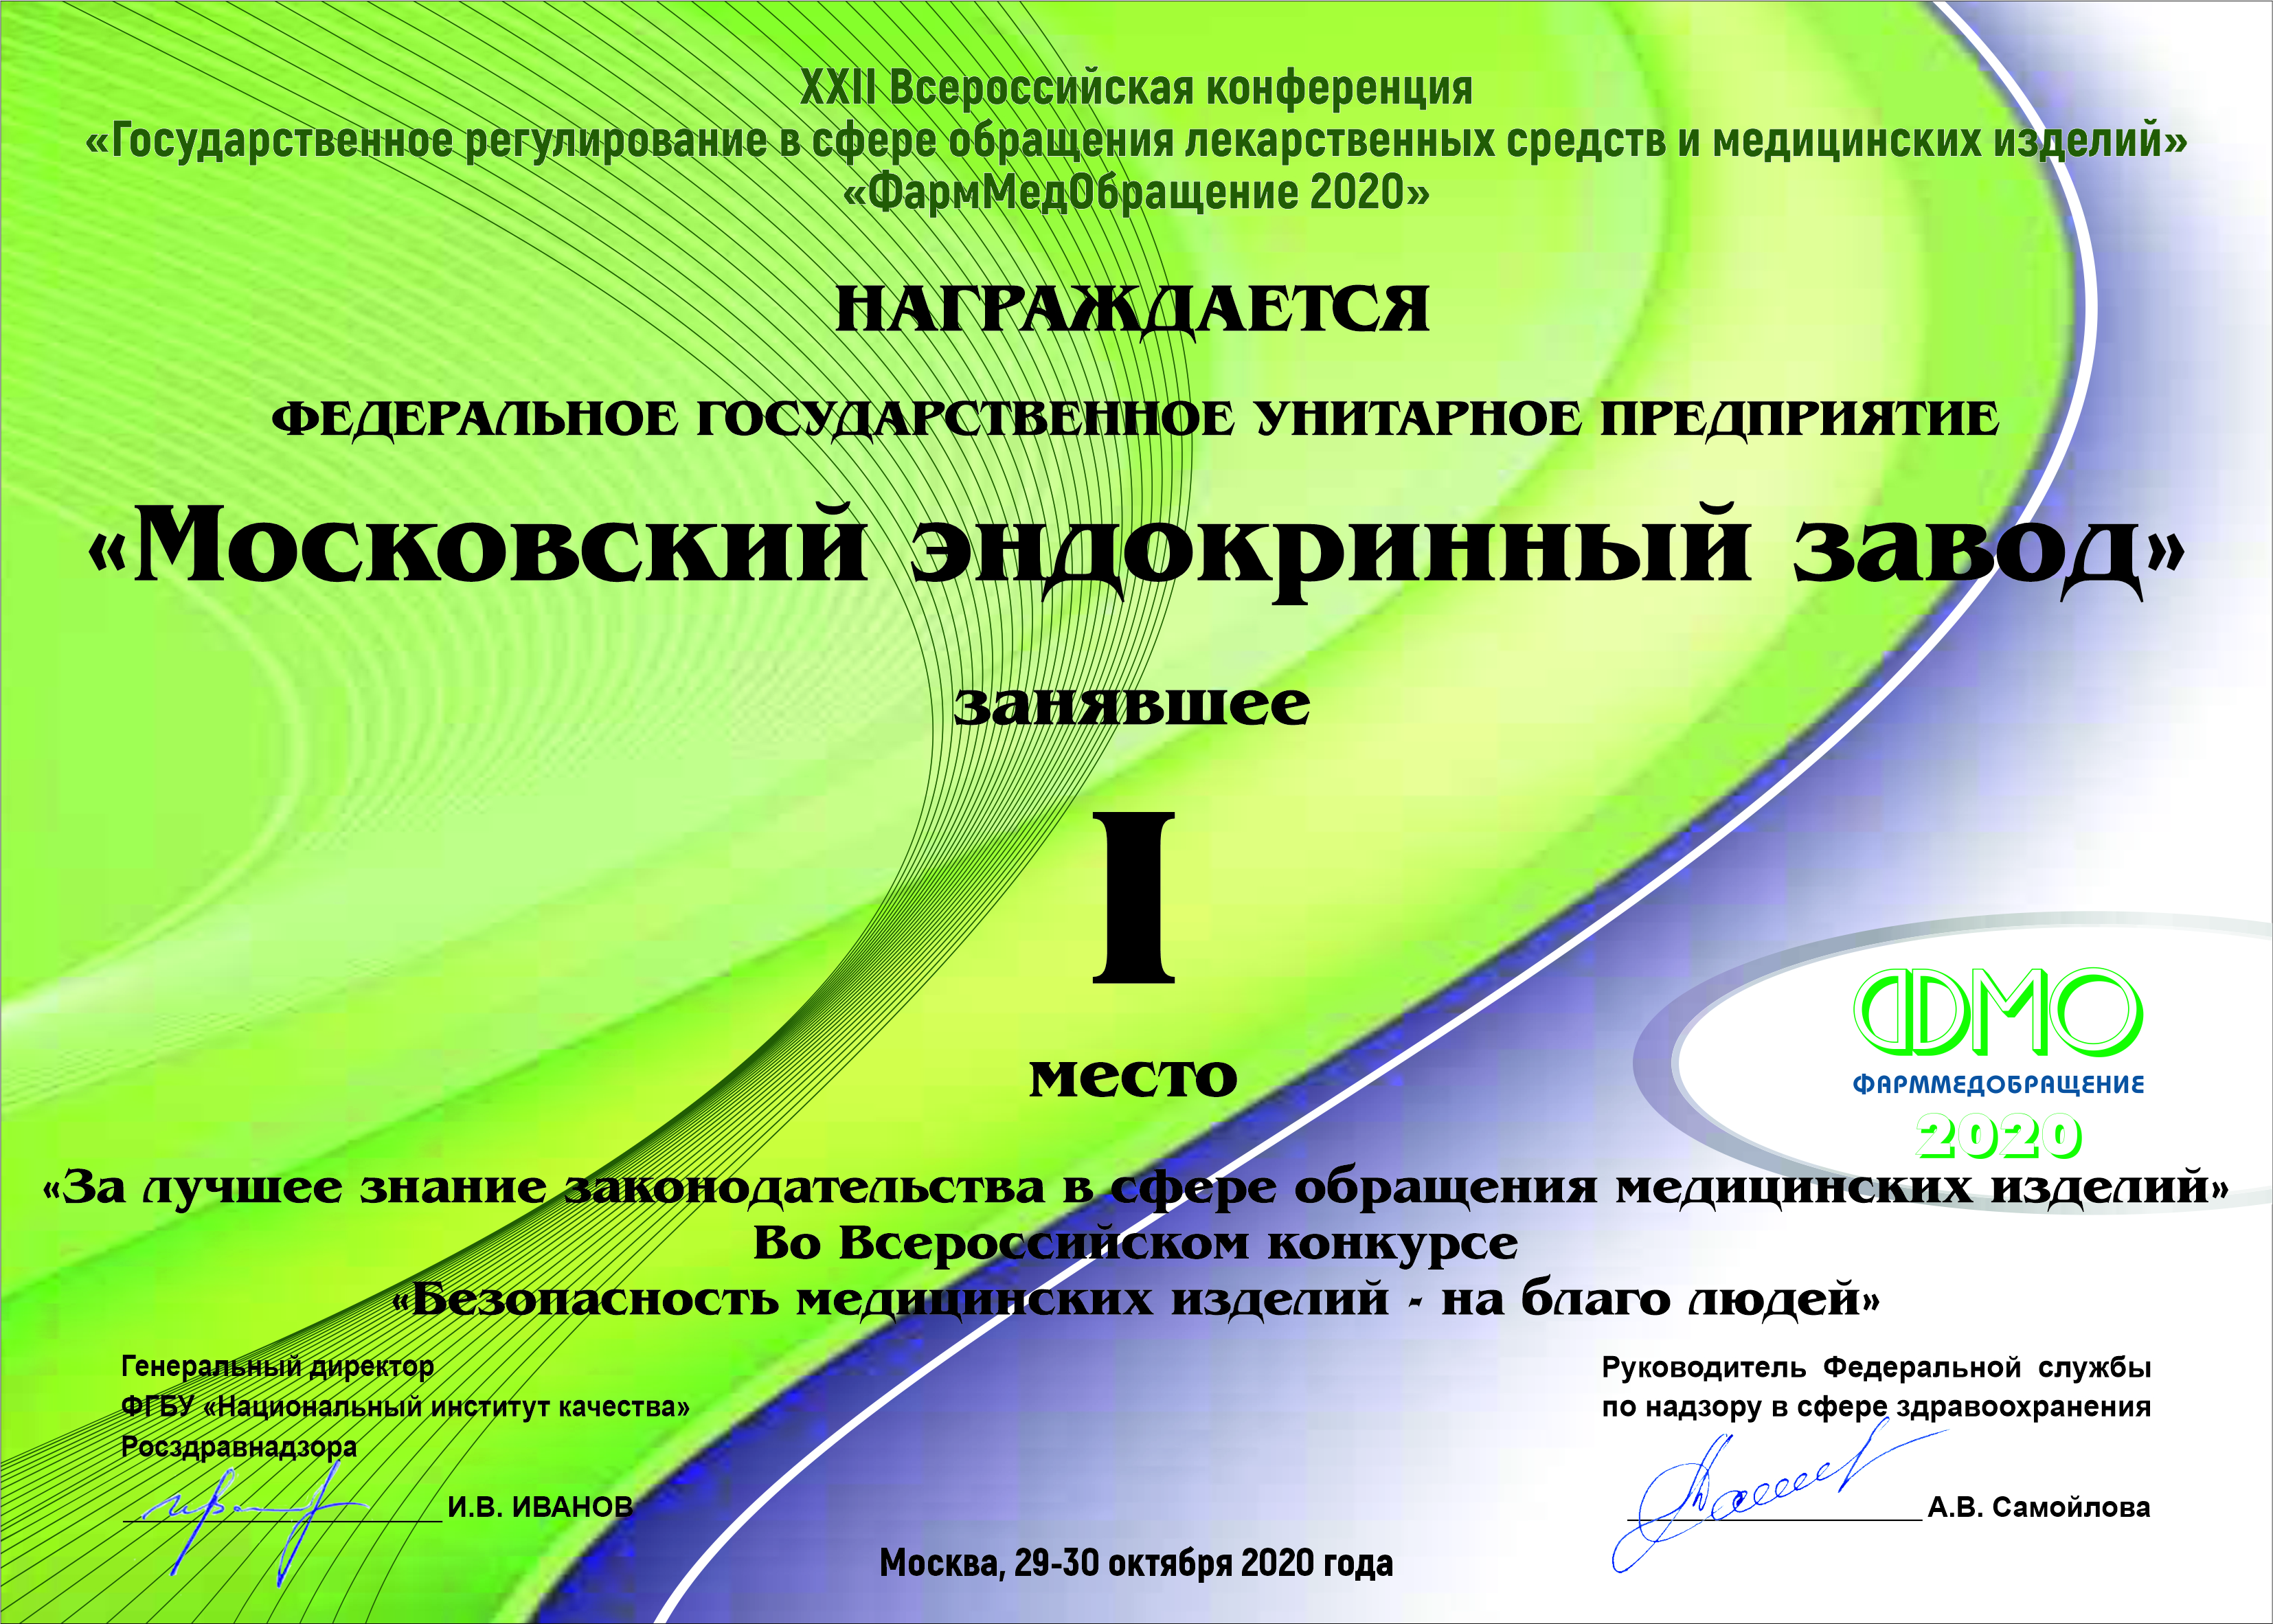 FSUE "Moscow Endocrine Plant" became a laureate of the All-Russian contest "Safety of medical devices for the benefit of people"